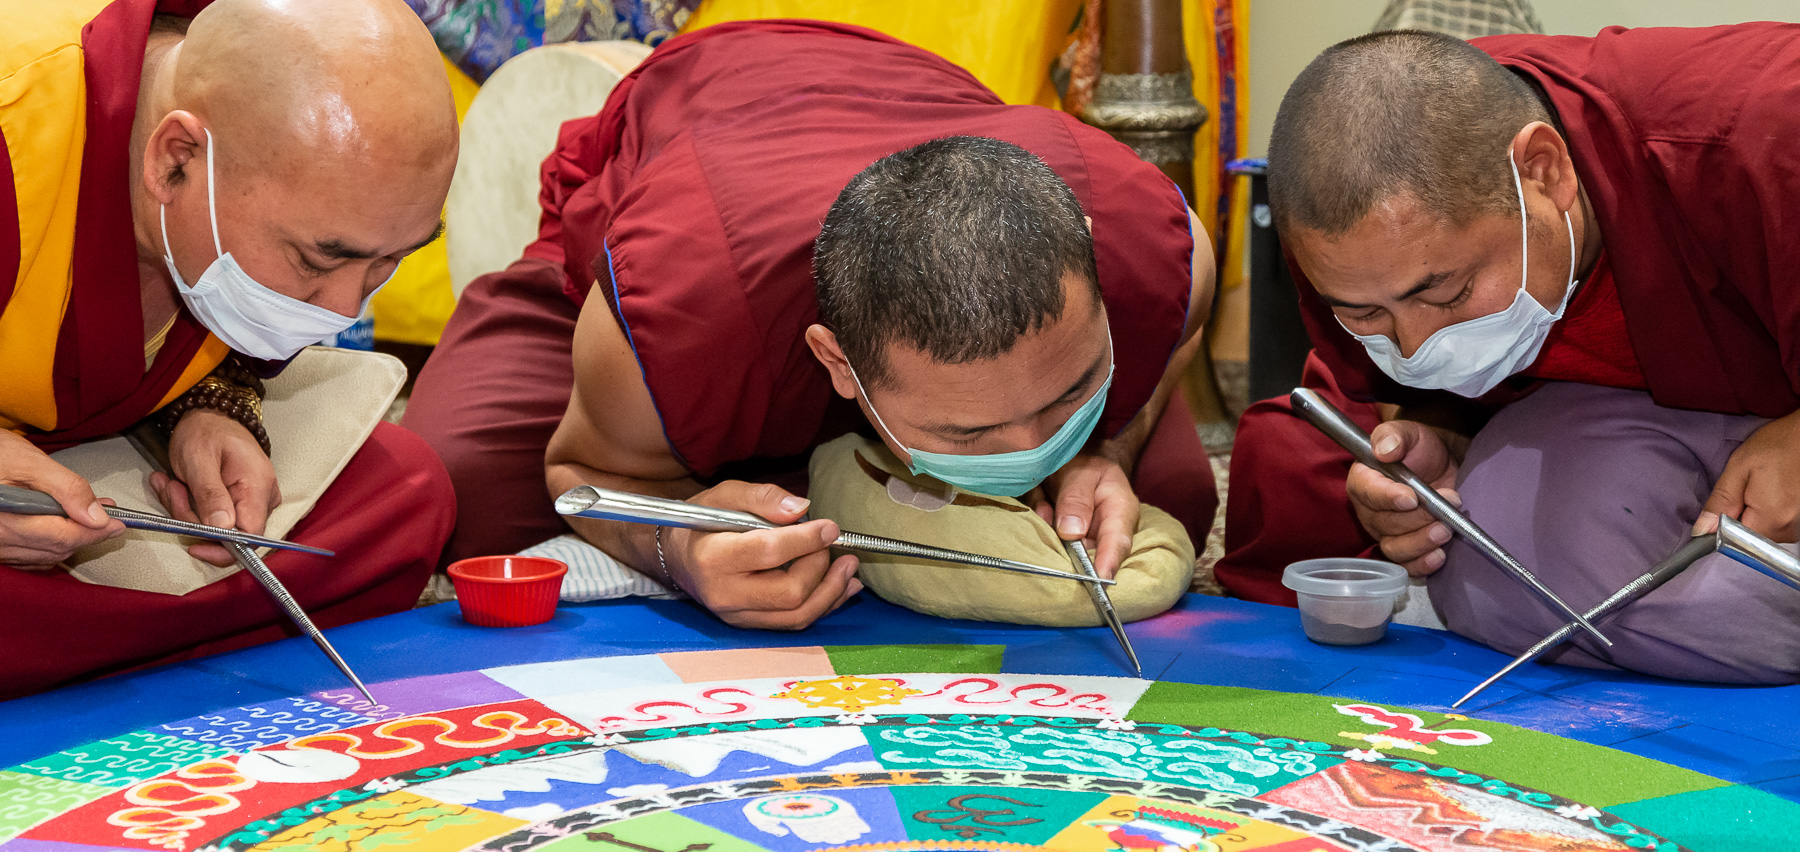 The monks rapidly rub their chak-purs together to deposit sand onto the mandala surface. They also wear masks over their mouths to avoid blowing the sand with their breath. (DePaul University/Jeff Carrion)